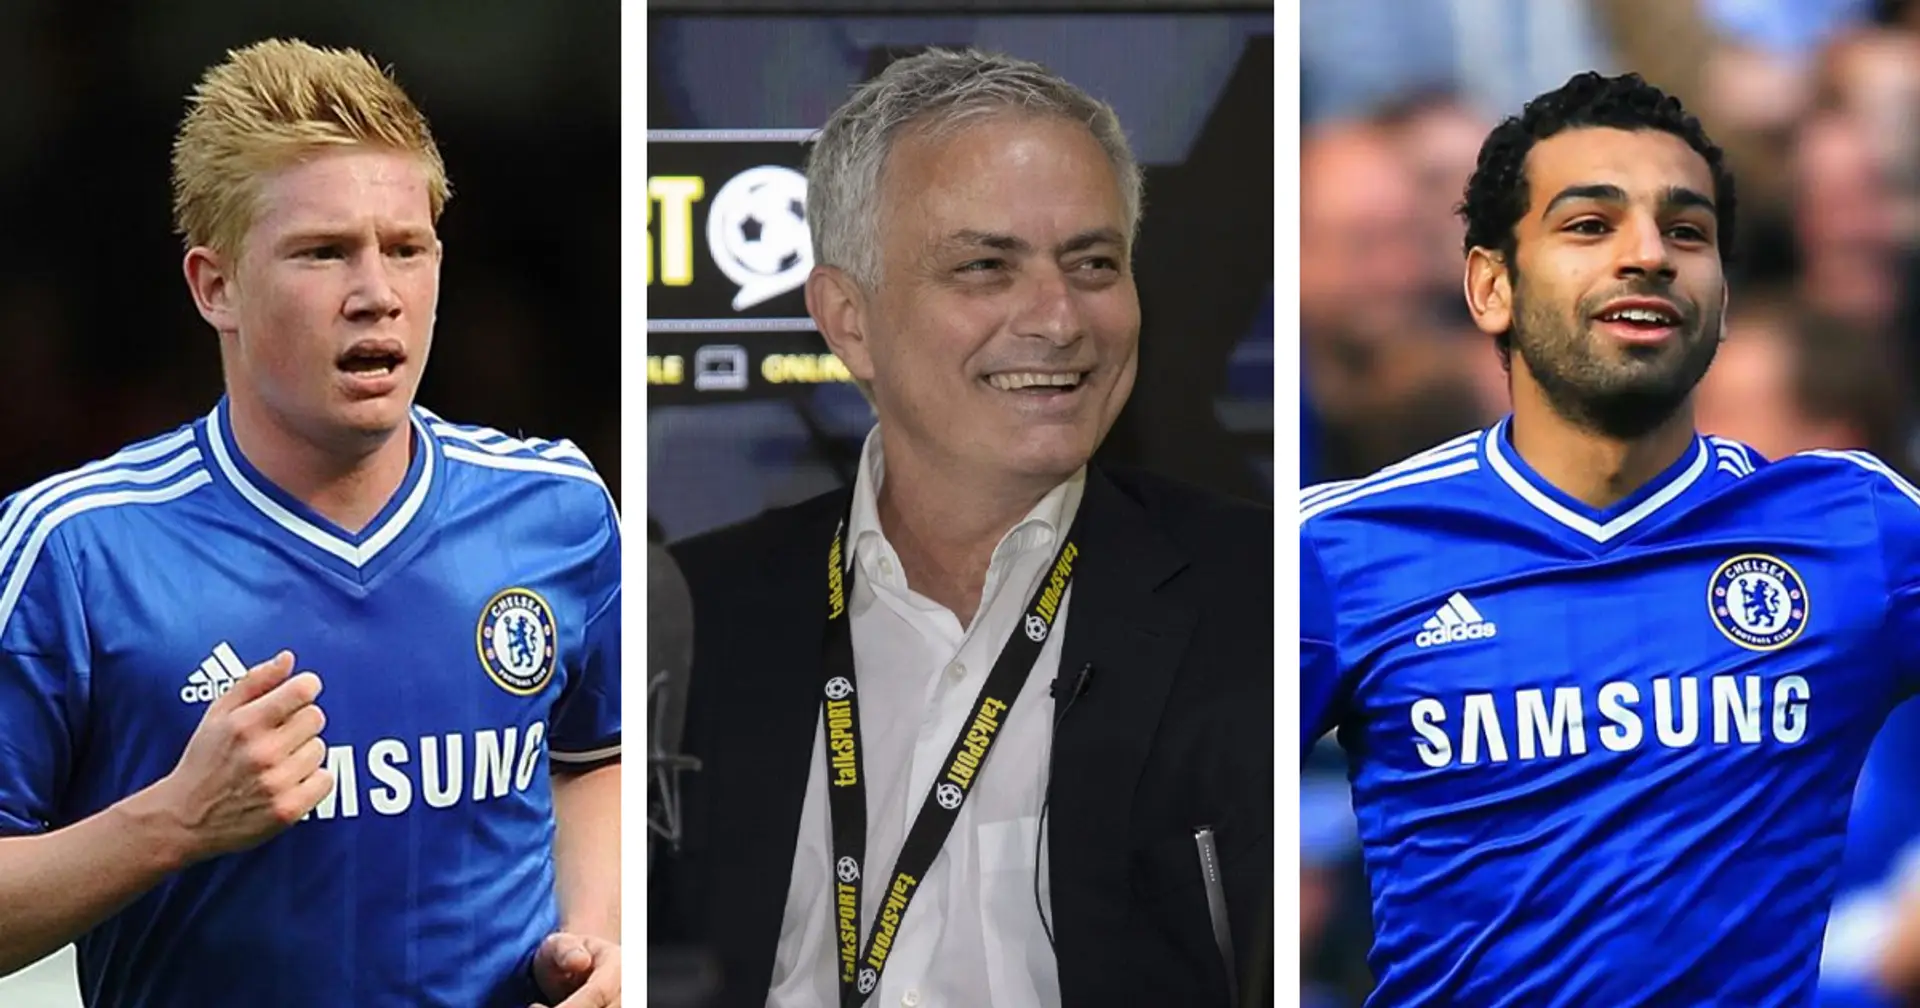 Mourinho reveals why De Bruyne left Chelsea but why did Salah leave? You asked - we answered